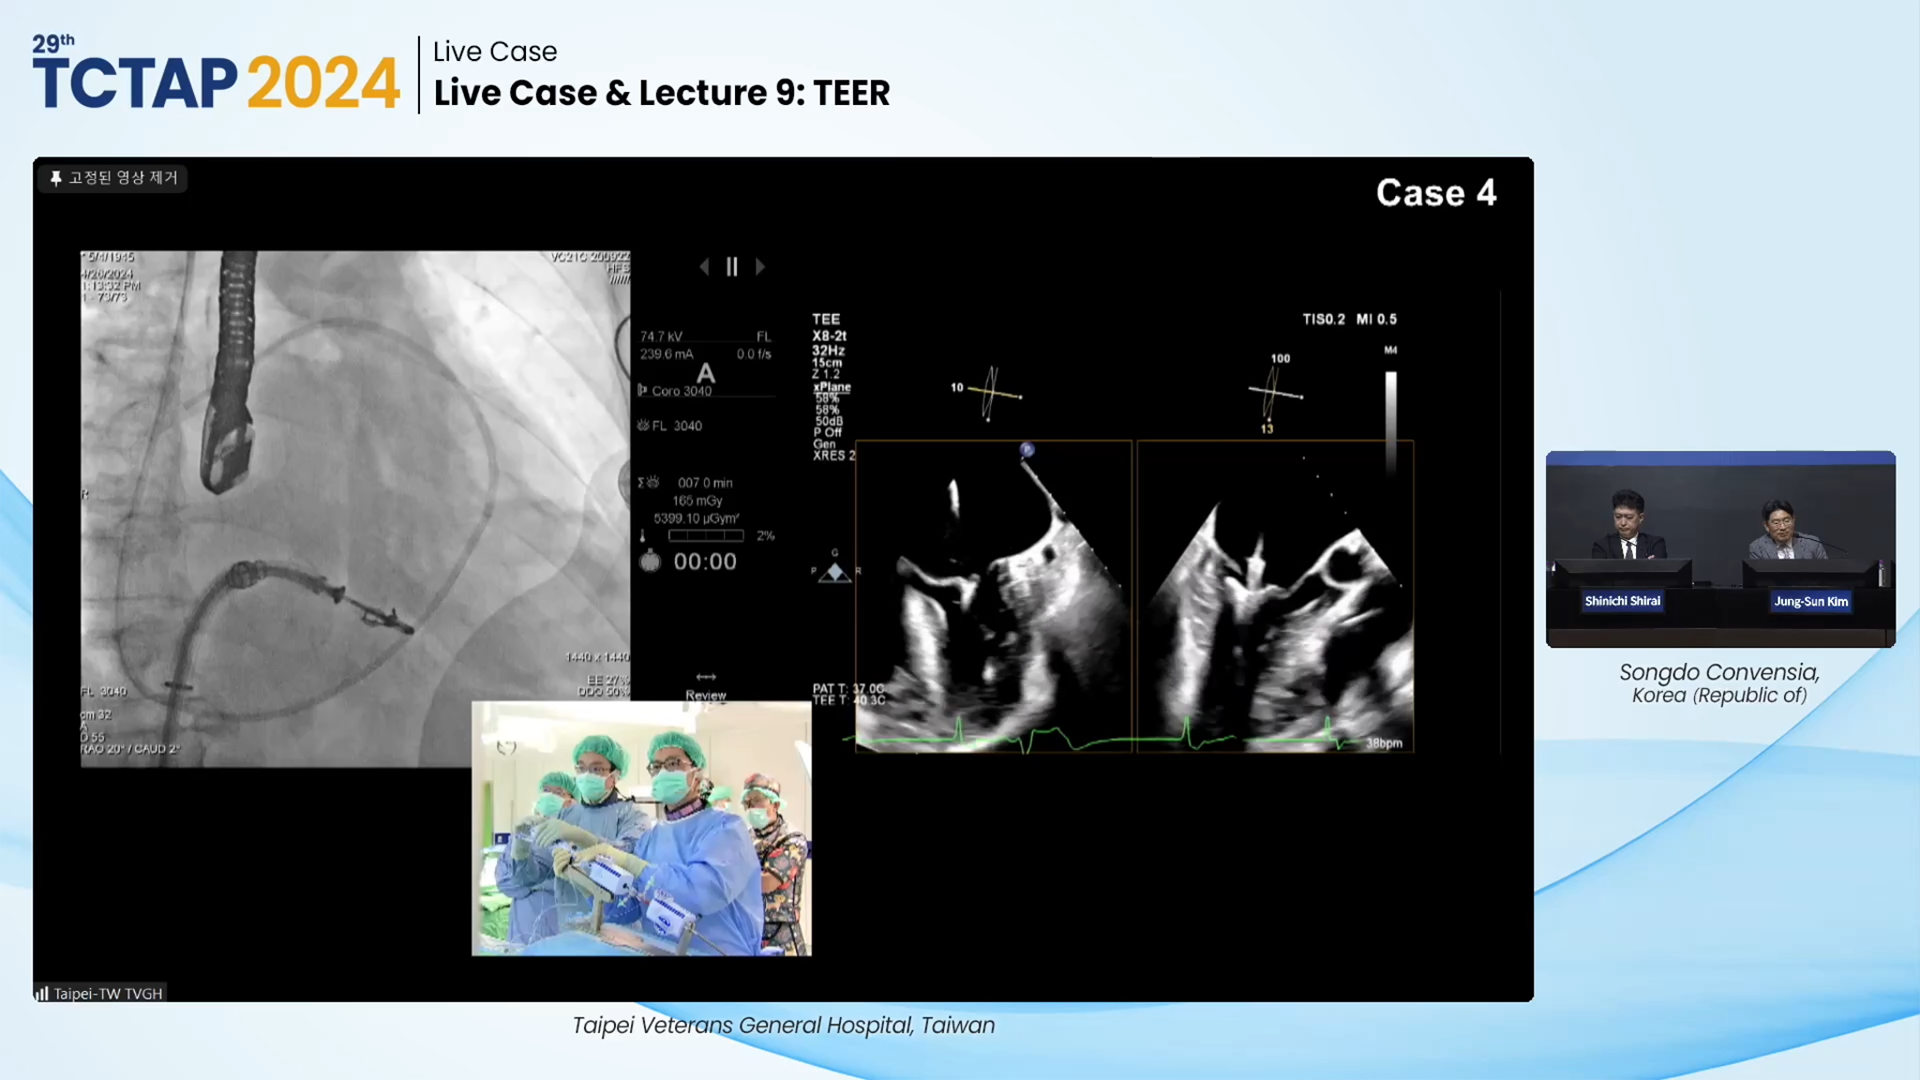 Live Case & Lecture 9: TEER